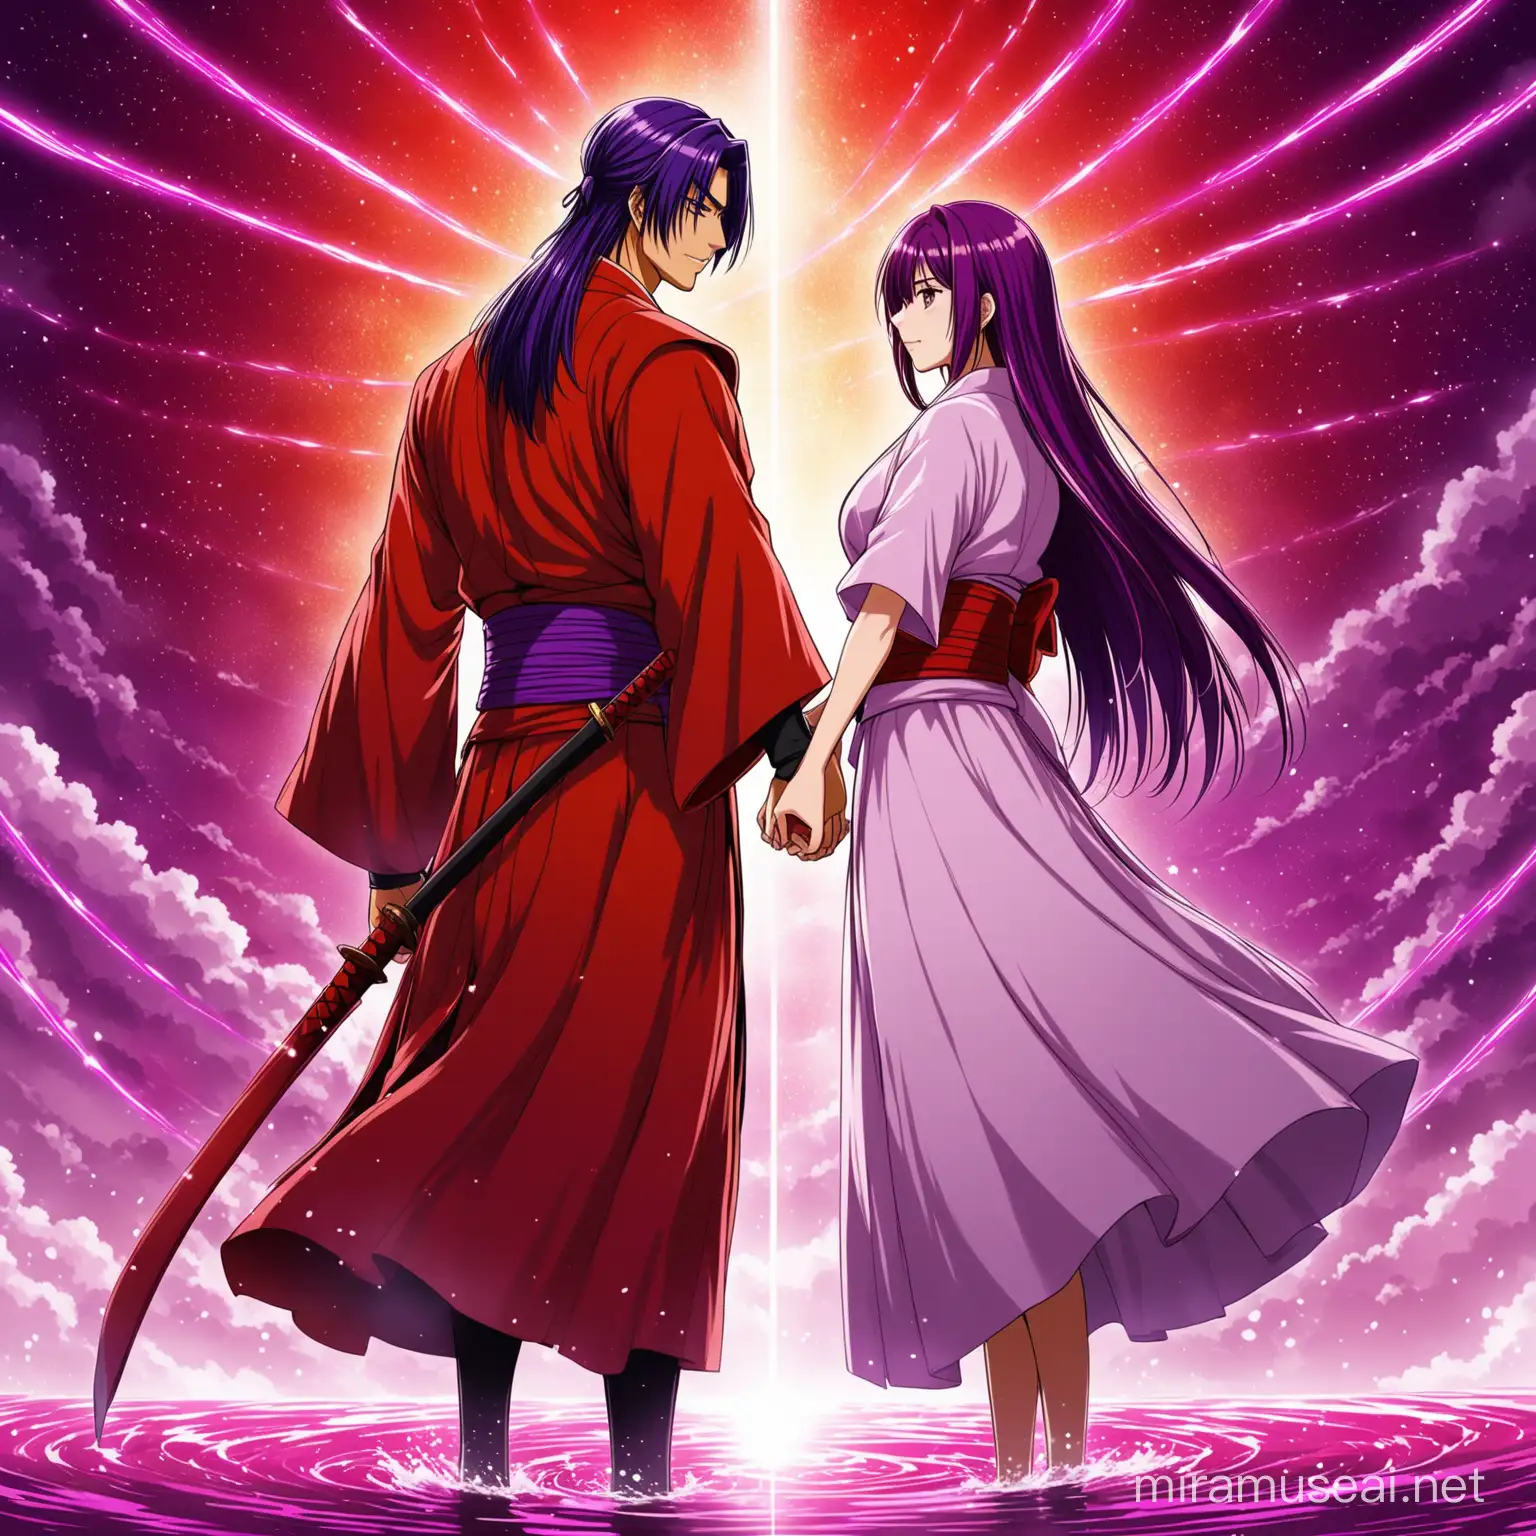 Rurornu kenshin love story, color red and purple, together with purpose to change the world, power couple, in it to win it energy